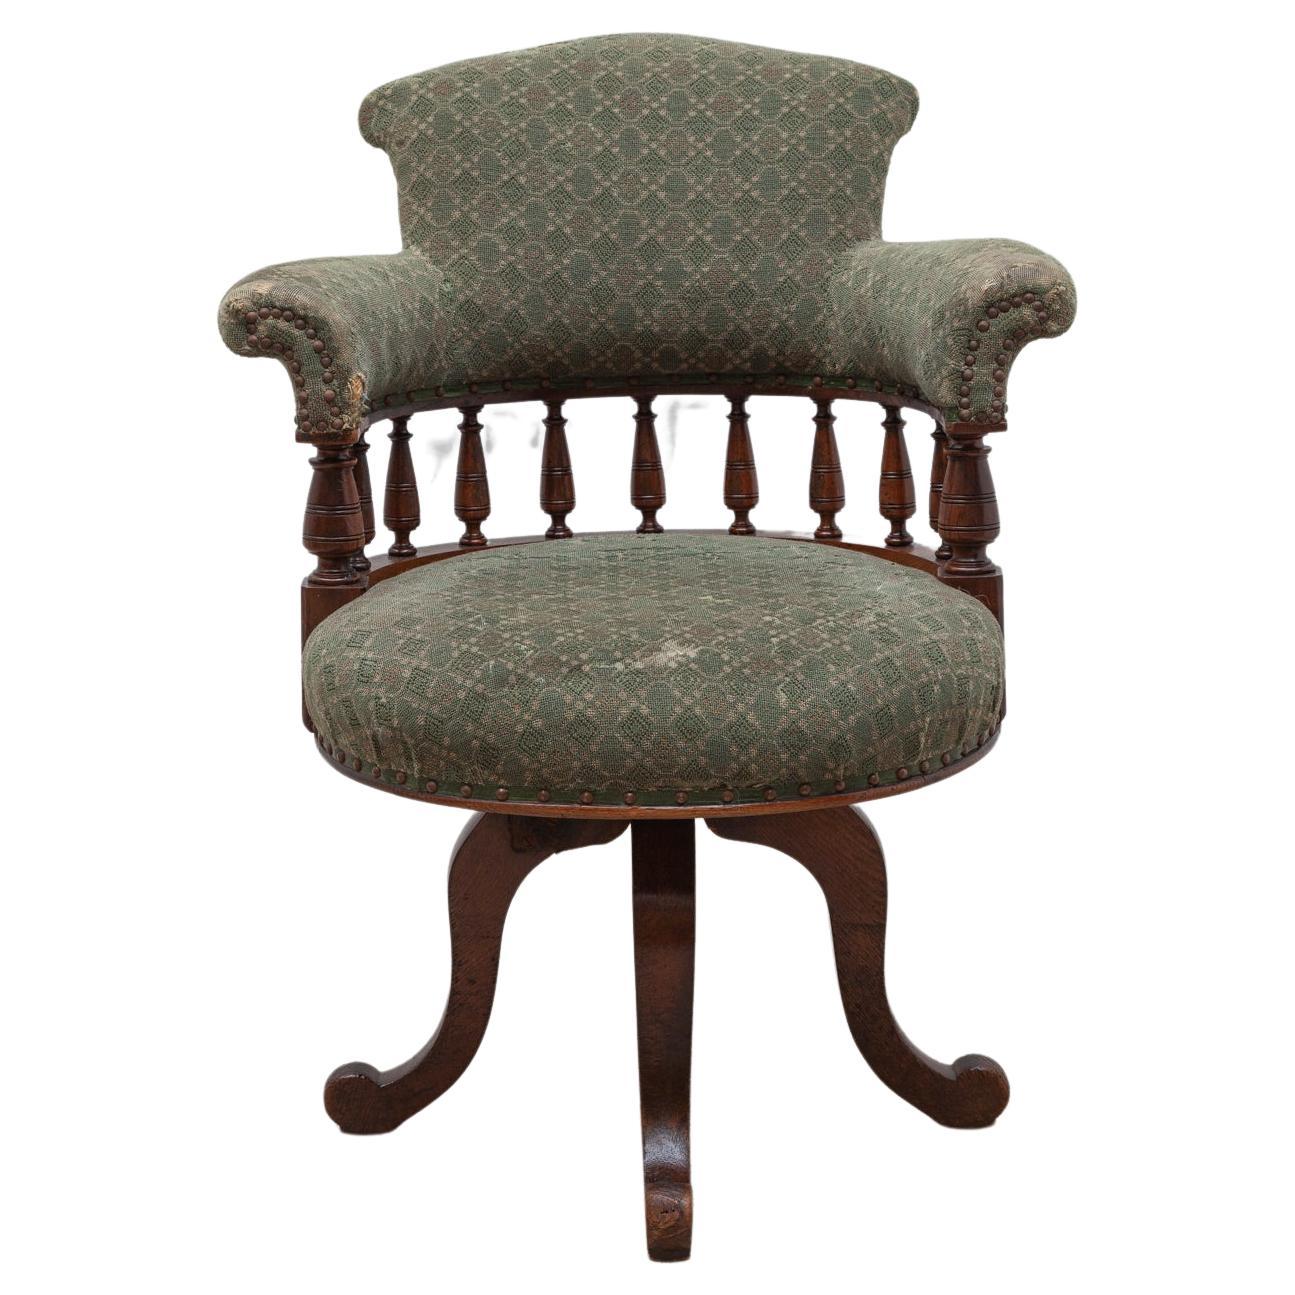 Beautiful traditional shipping era swivel Chippendale desk chair. The Captain's Chair, with the modern addition of a turn and tilt mechanism. The comfortable desk chair is in its original good condition, the upholstery shows places of intensive use,